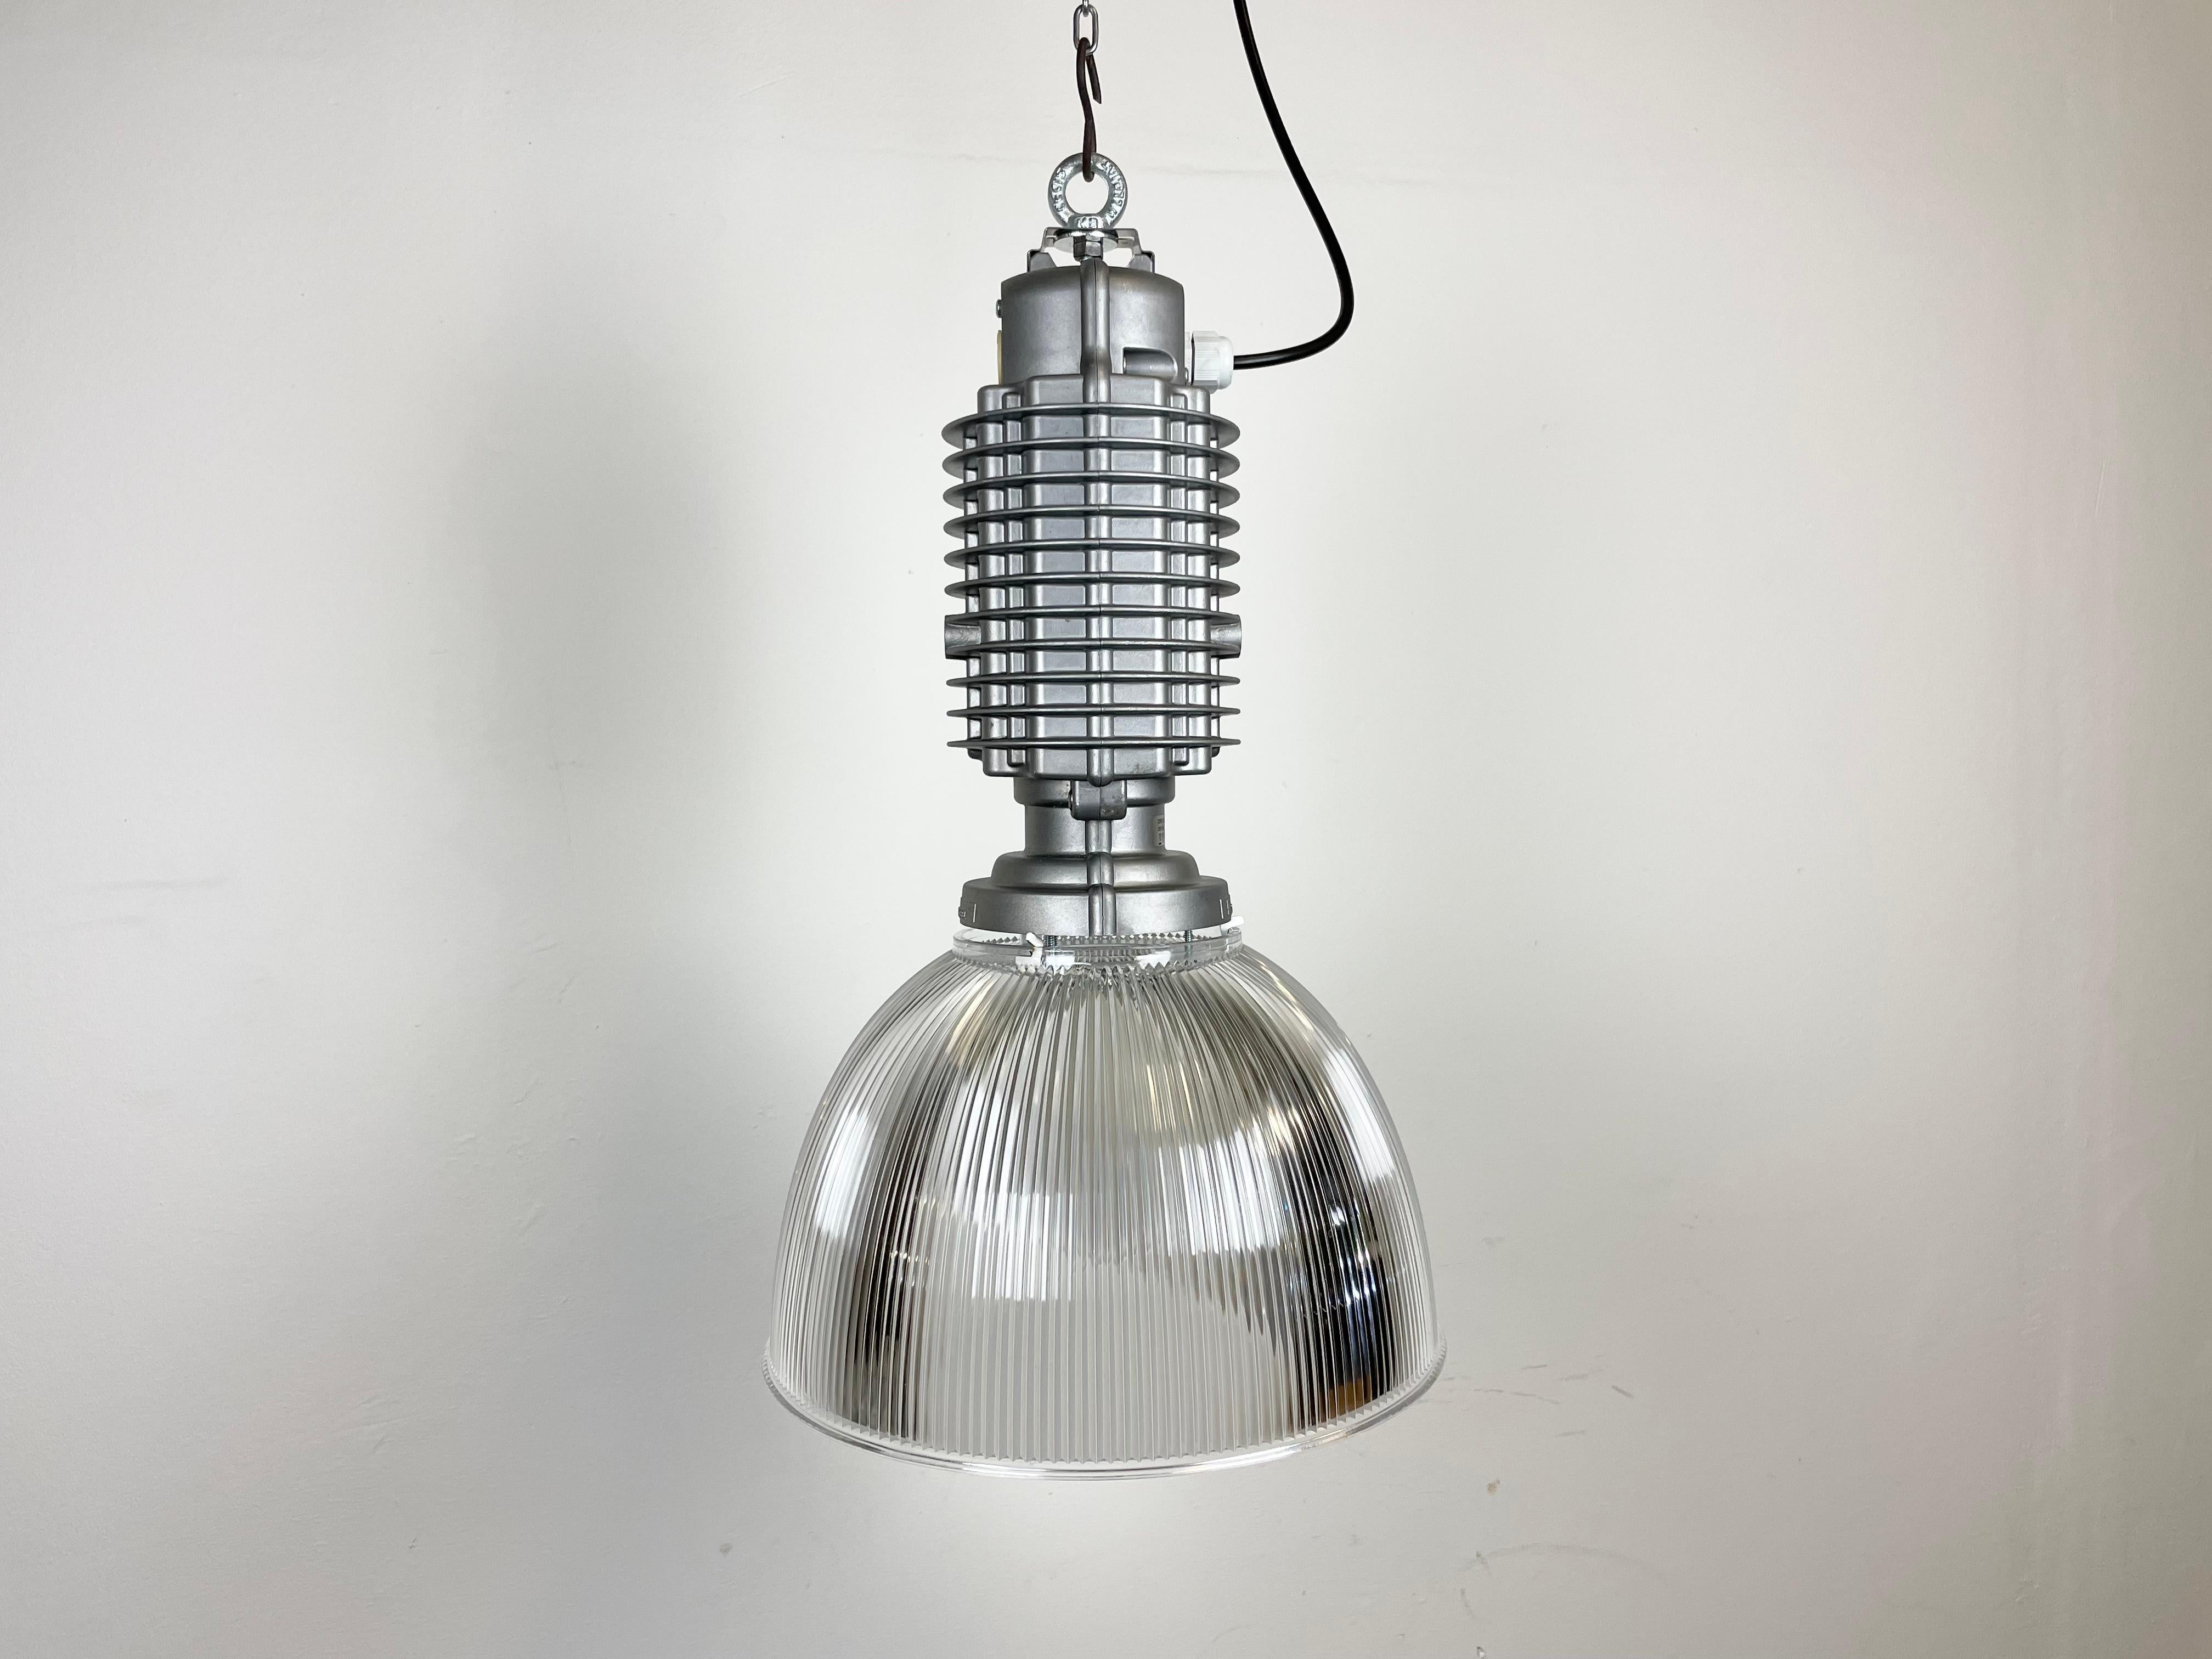 This industrial pendant lamp was designed by Charles Keller for Zumtobel Staff during the 1990s. It features a cast aluminum top and a transparent plastic shade. The original socket requires E27 lightbulbs. New wire. The diameter of the shade is 32